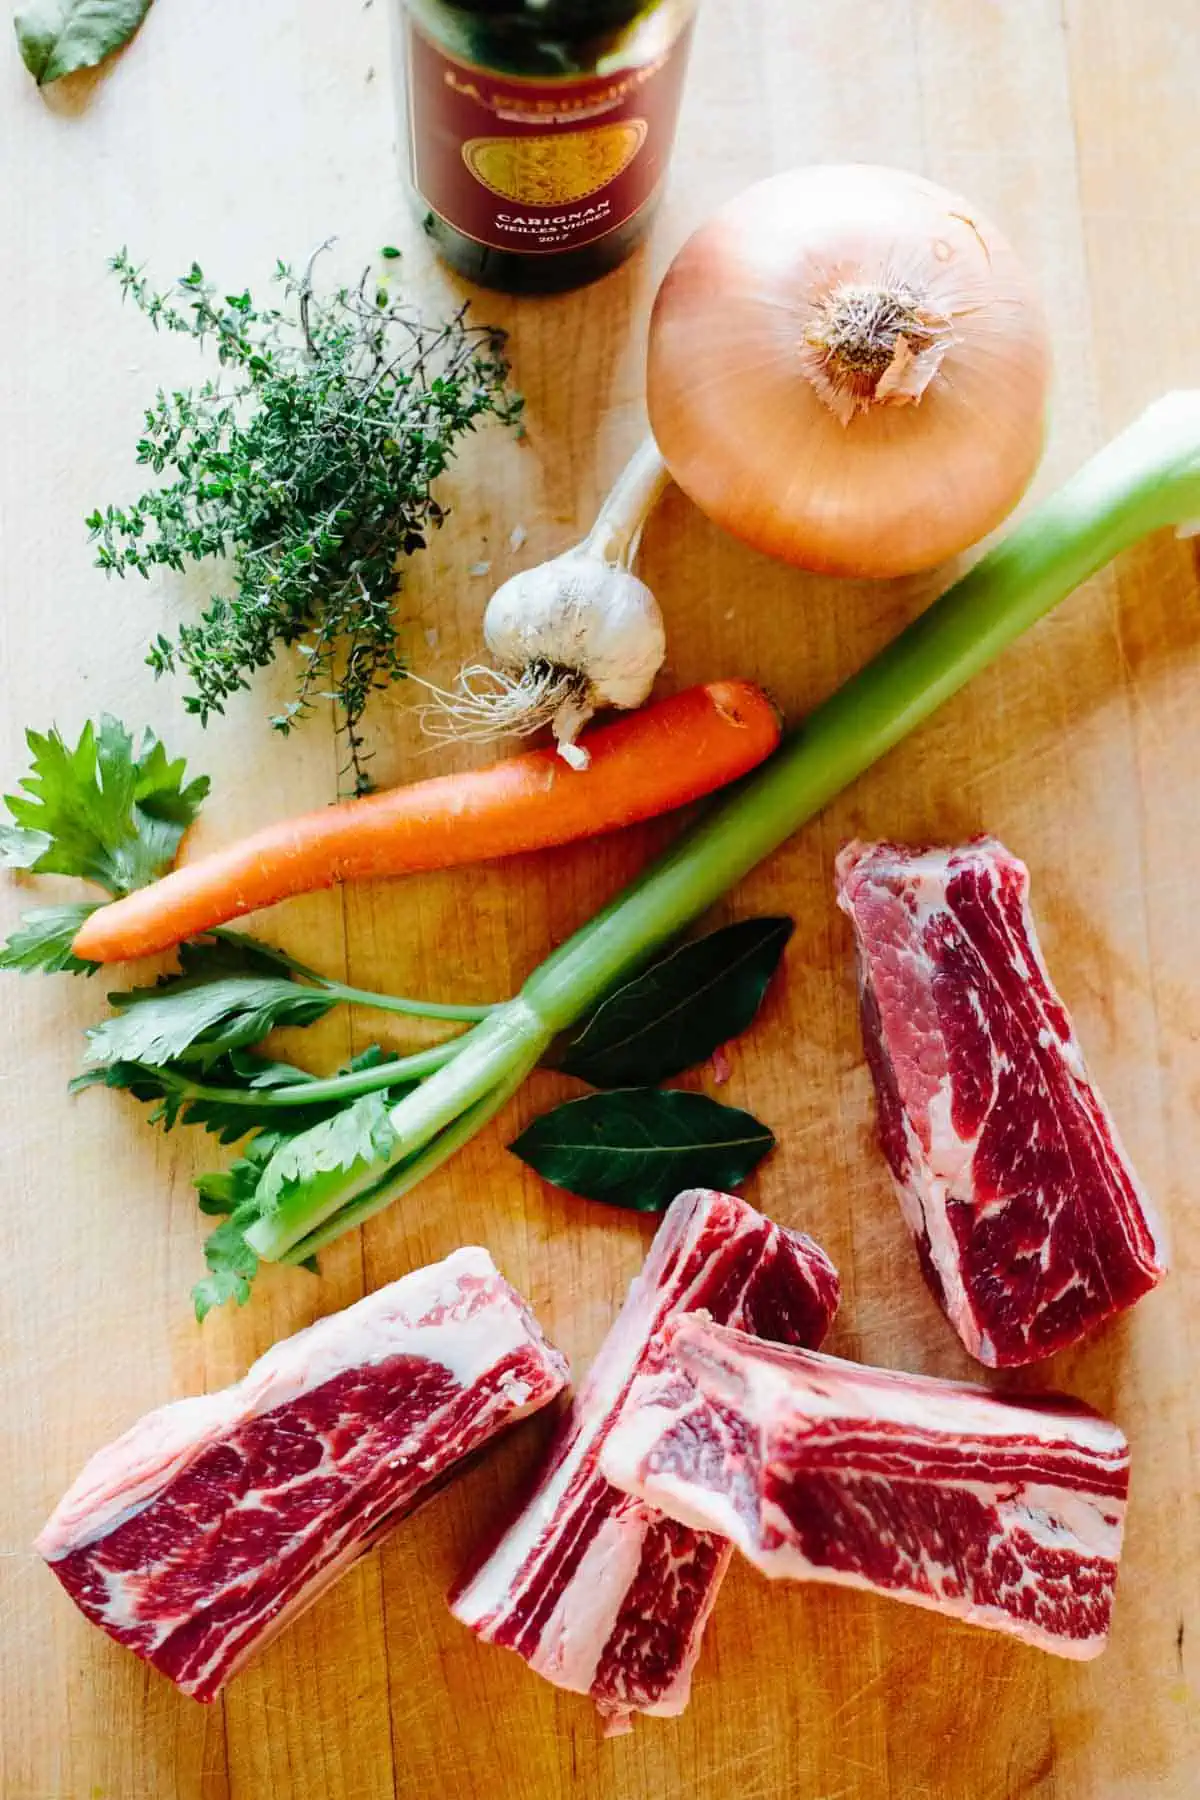 Fresh ingredients for short rib recipe laid out on a wood surface.